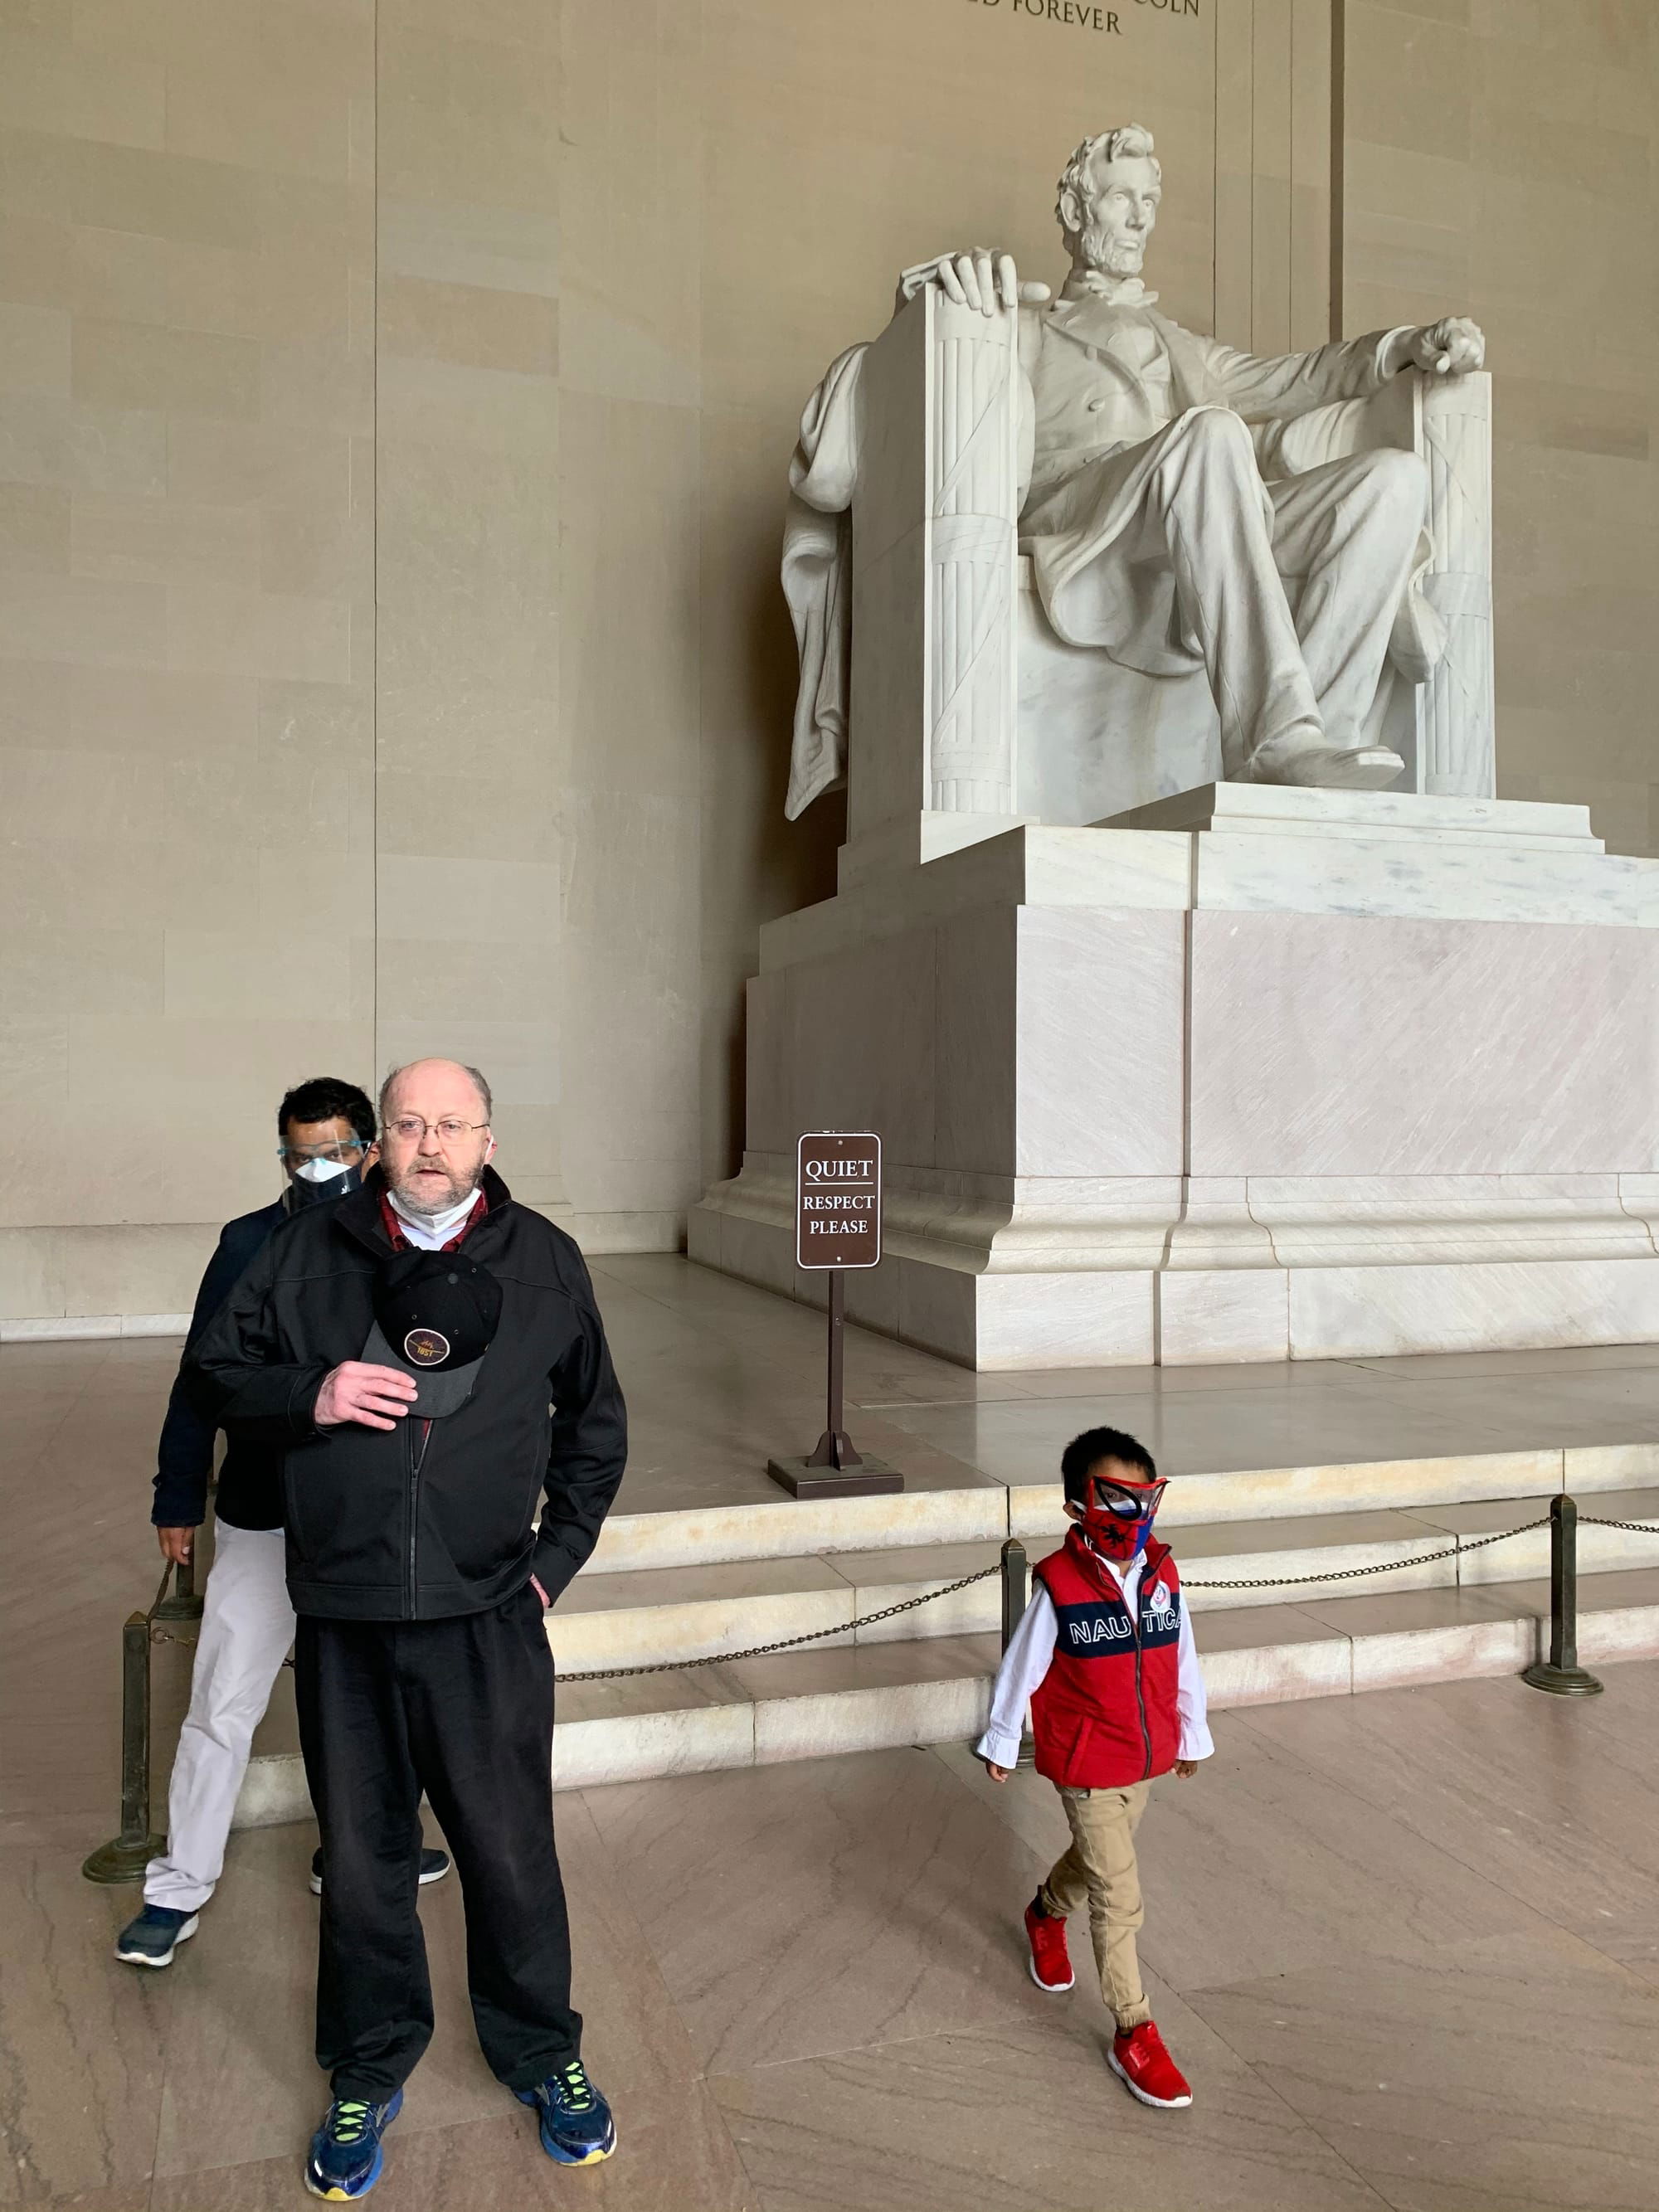 Steve with Lincoln